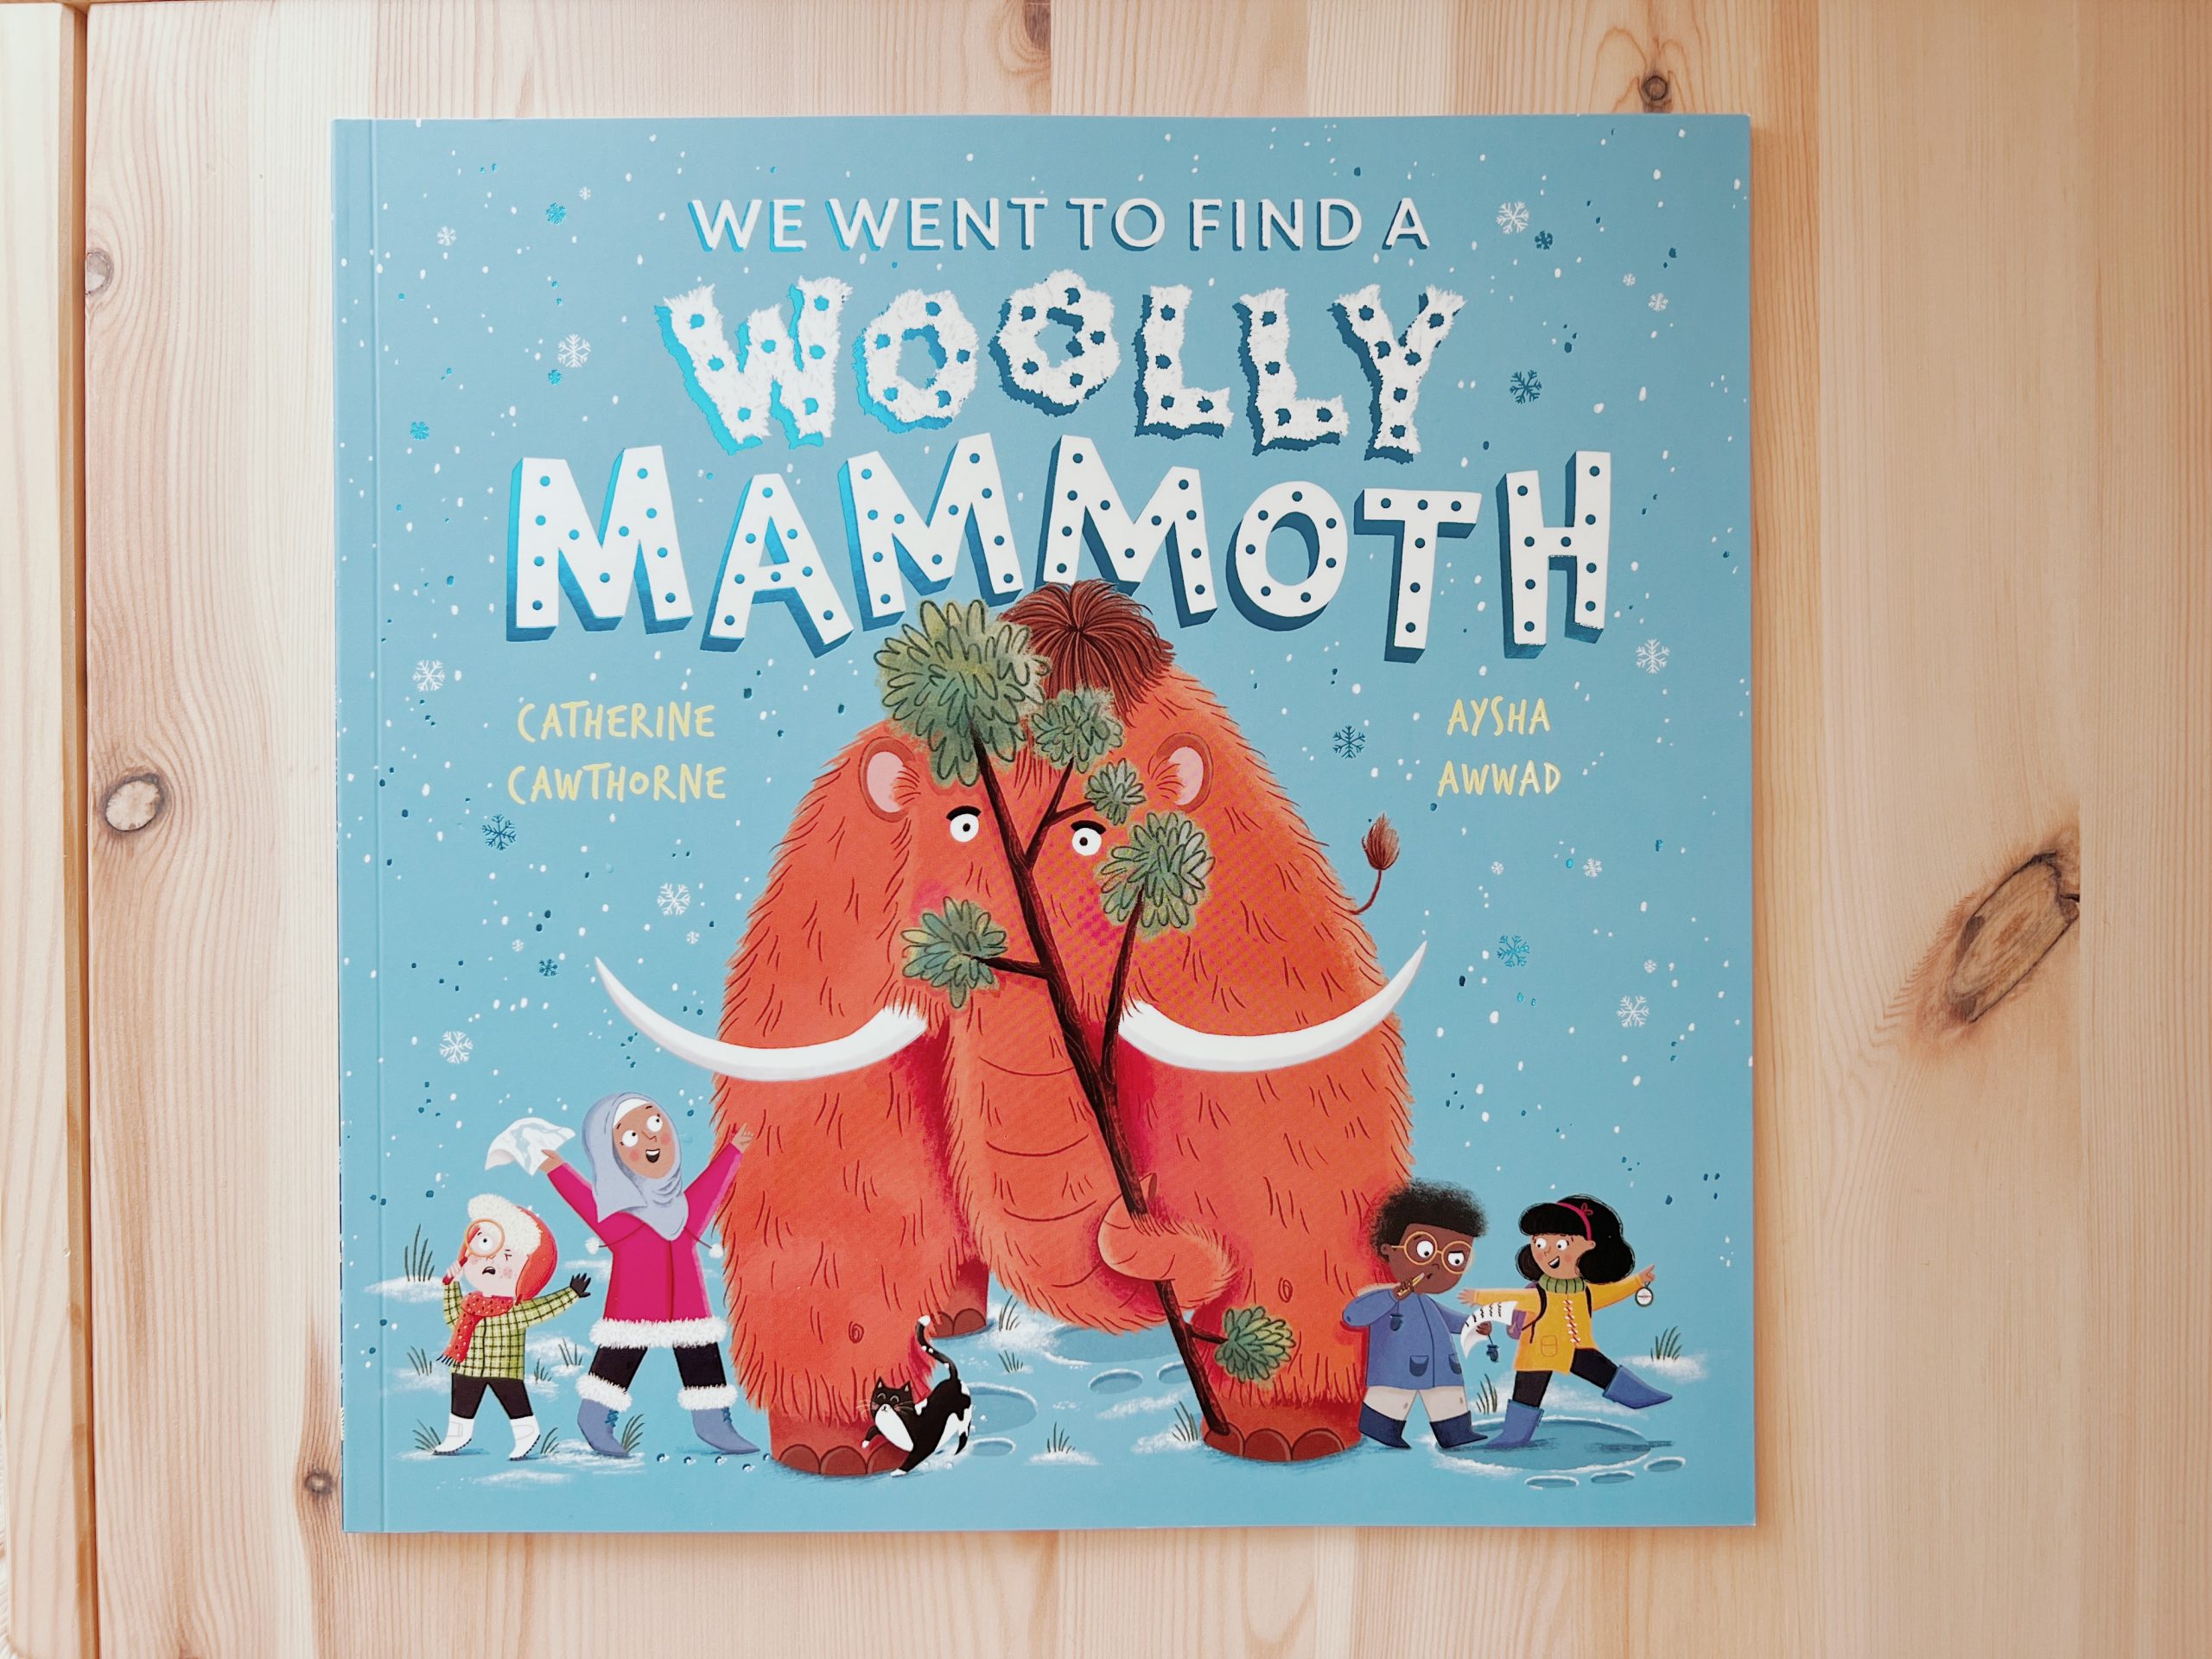 We Went to Find a Woolly Mammoth